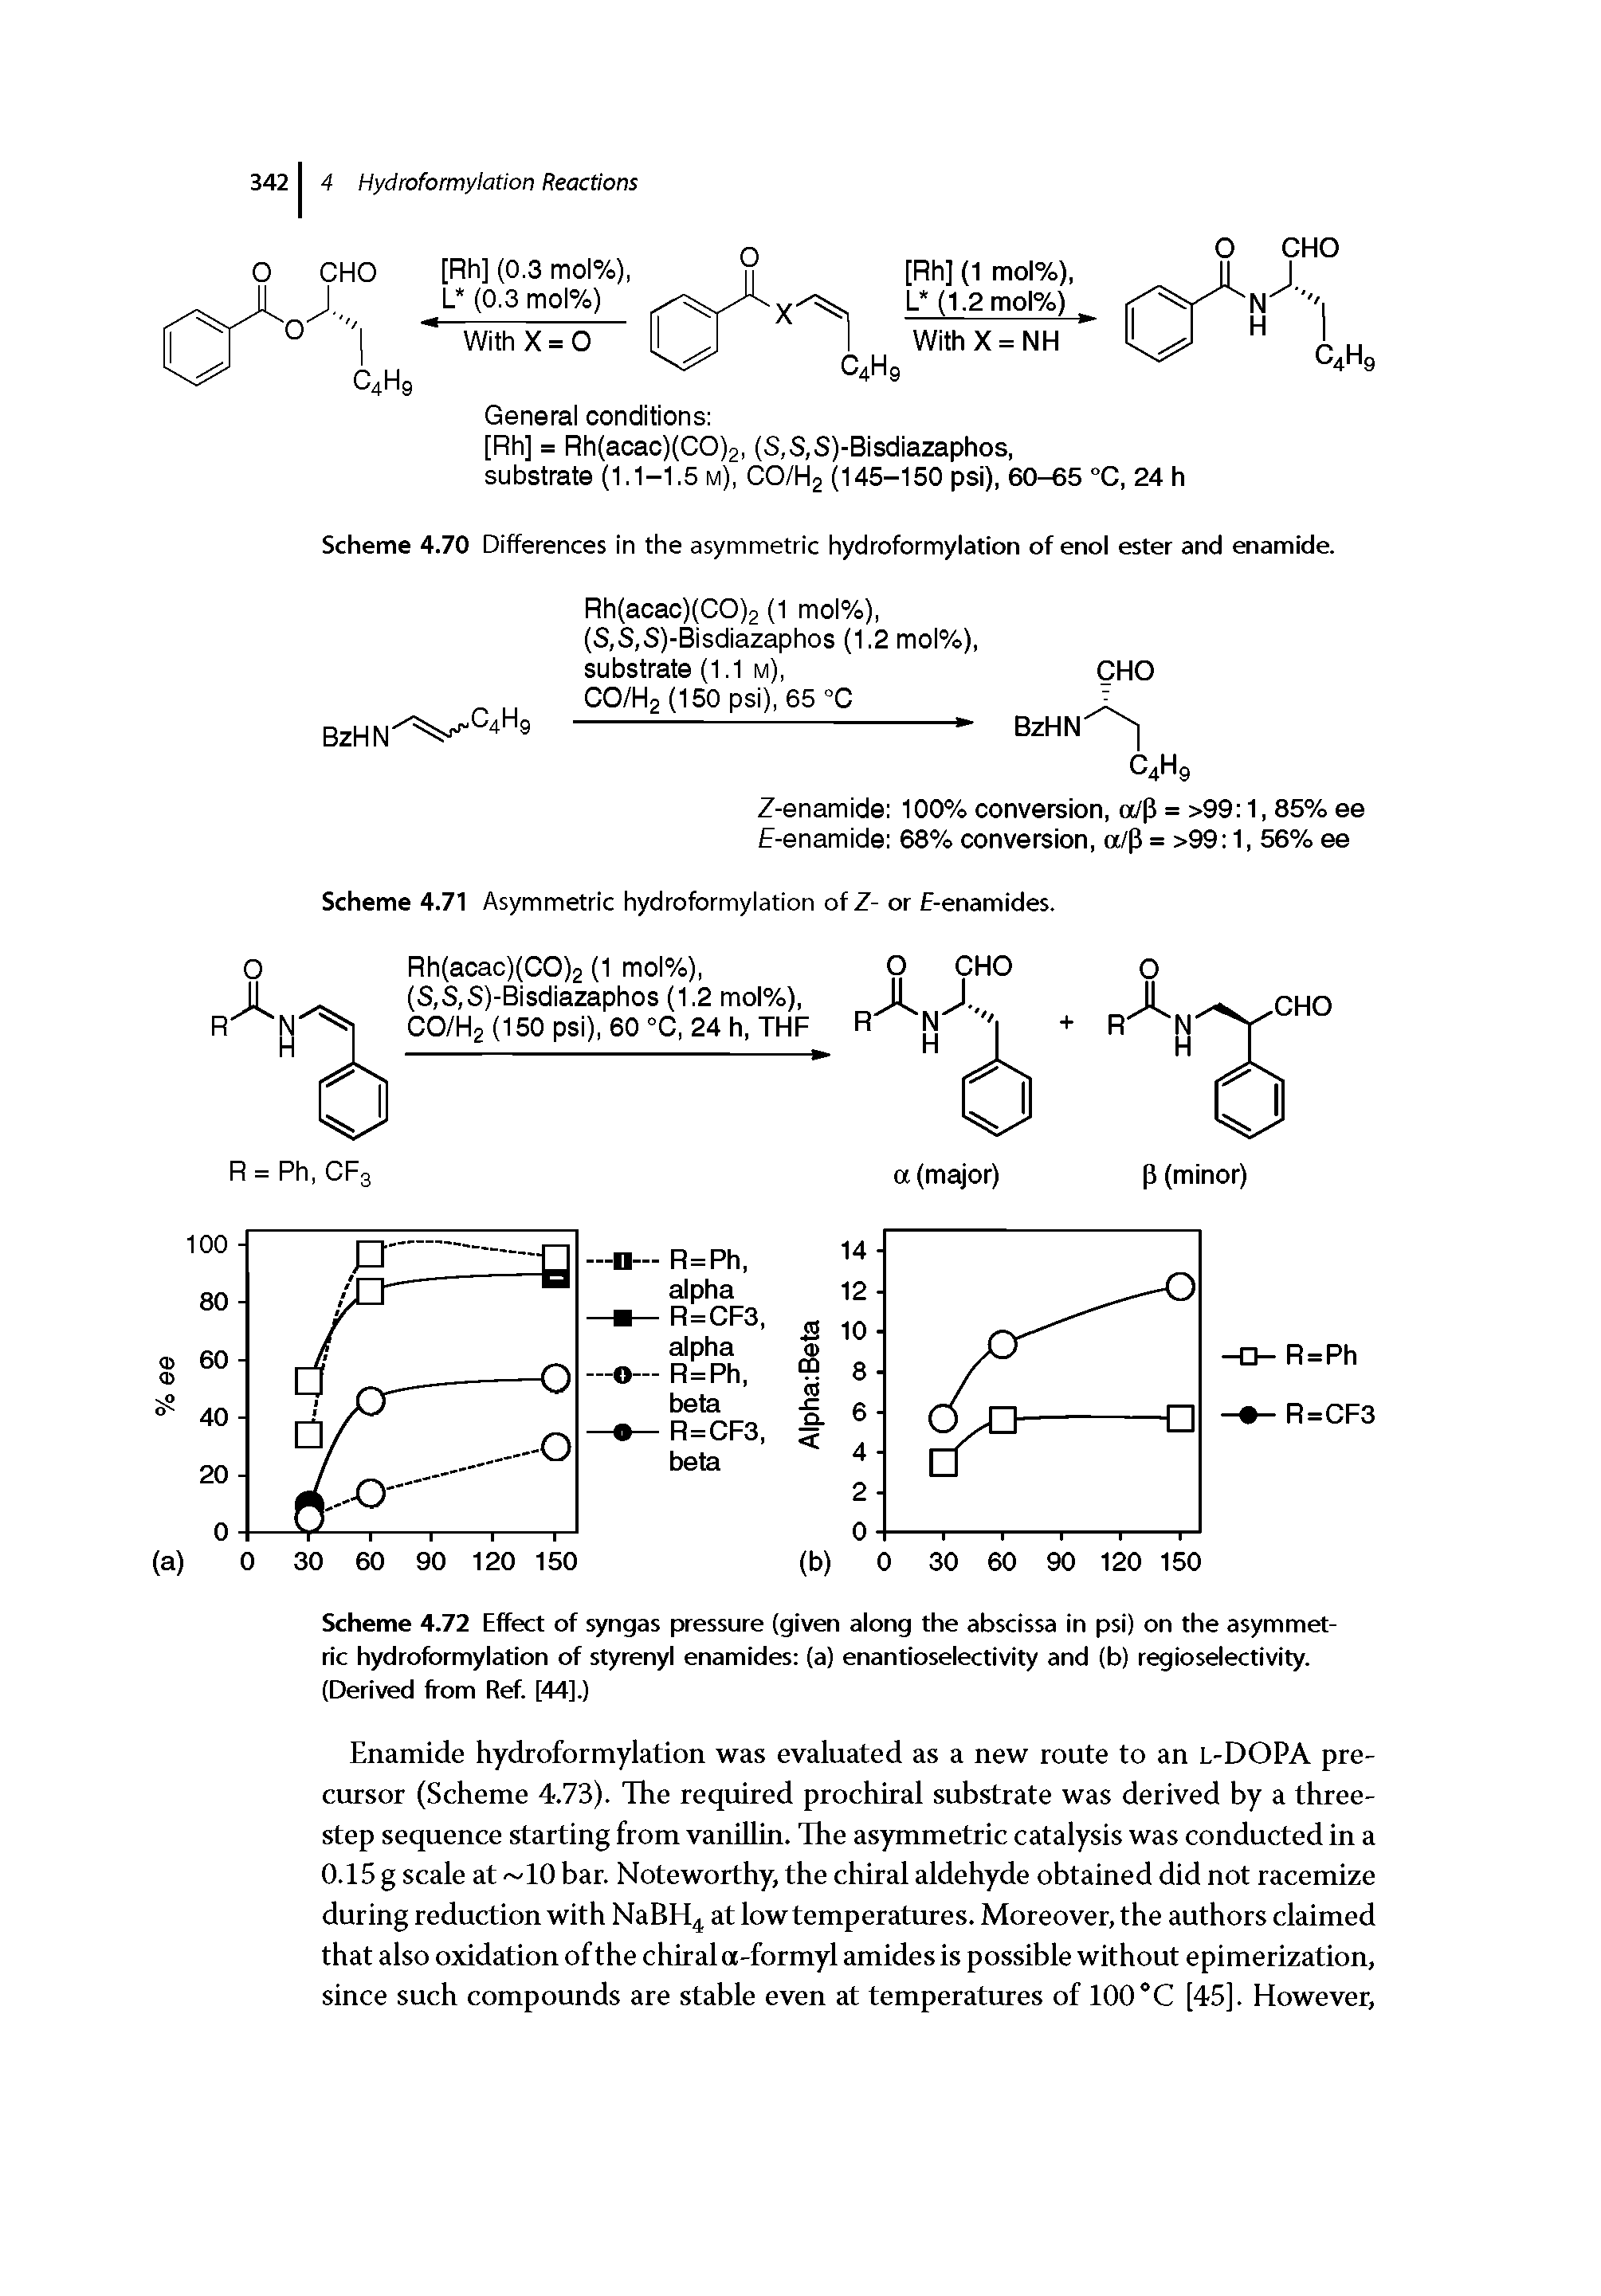 Scheme 4.72 Effect of syngas pressure (given along the abscissa in psi) on the asymmetric hydroformylation of styrenyl enamides (a) enantioselectivity and (b) regioselectivity. (Derived from Ref. [44].)...